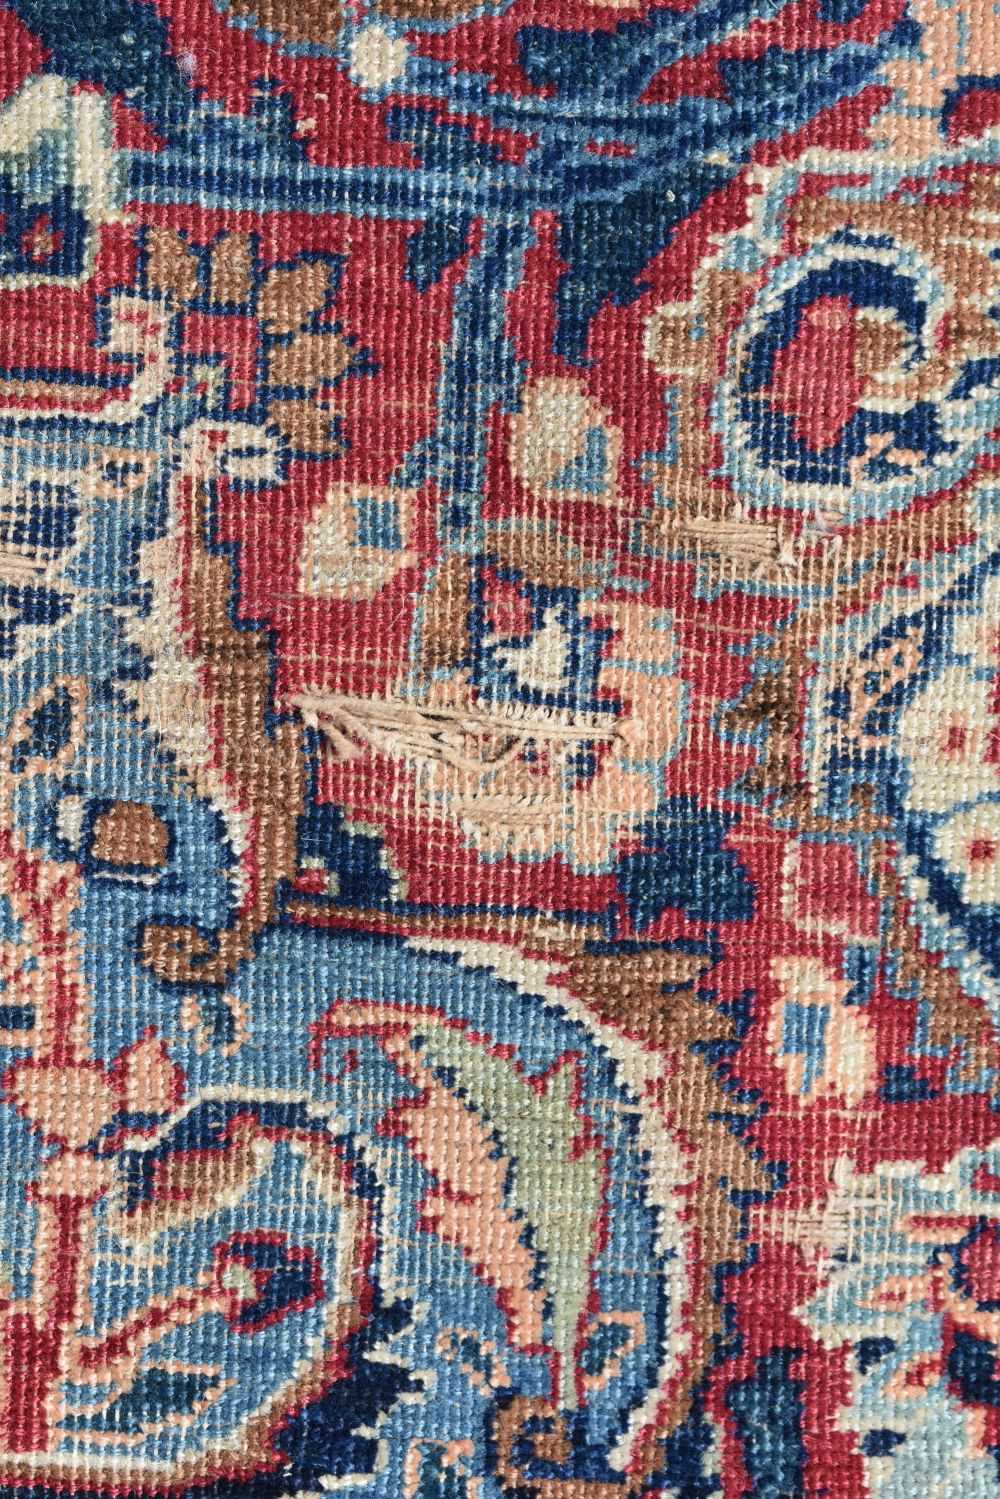 A Persian rug 189 x 122 cm - Image 5 of 14